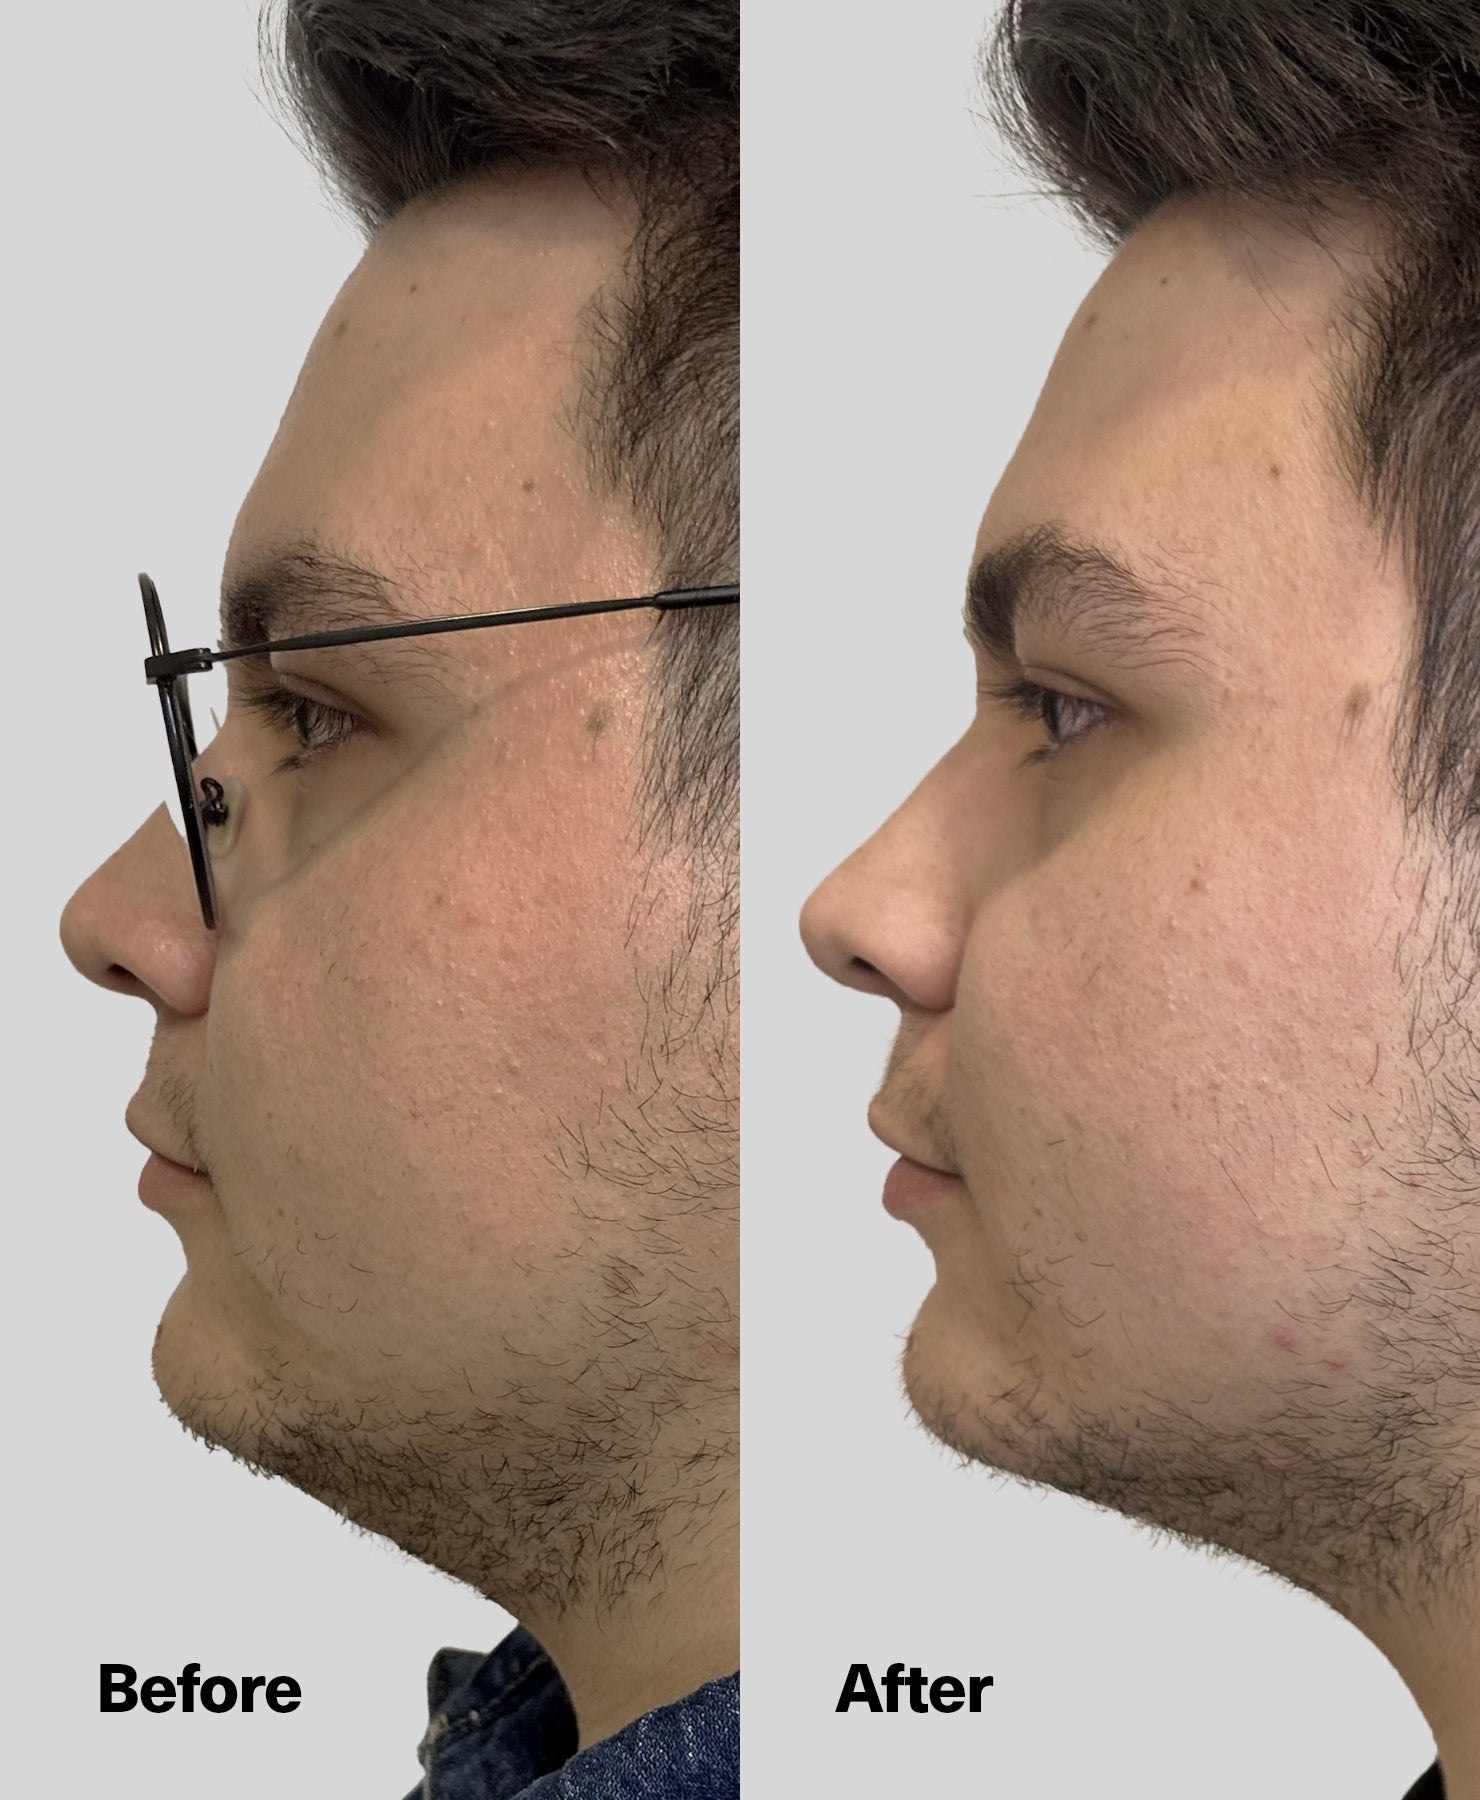 Male before and after jawline and neck results.